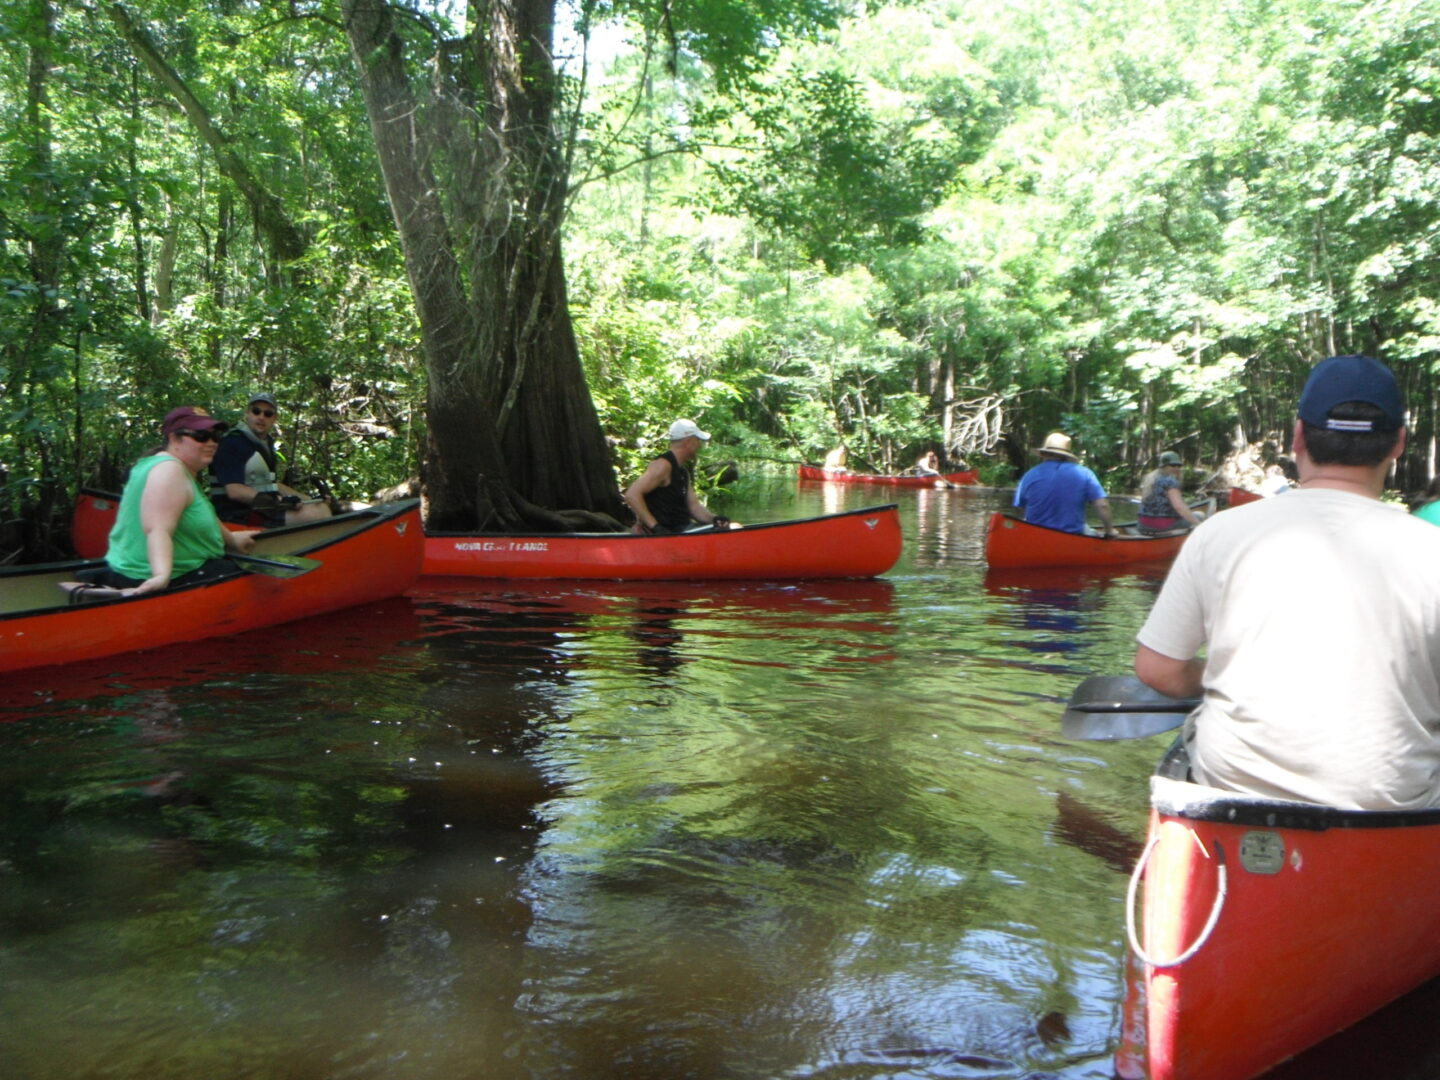 a group of people in different canoes